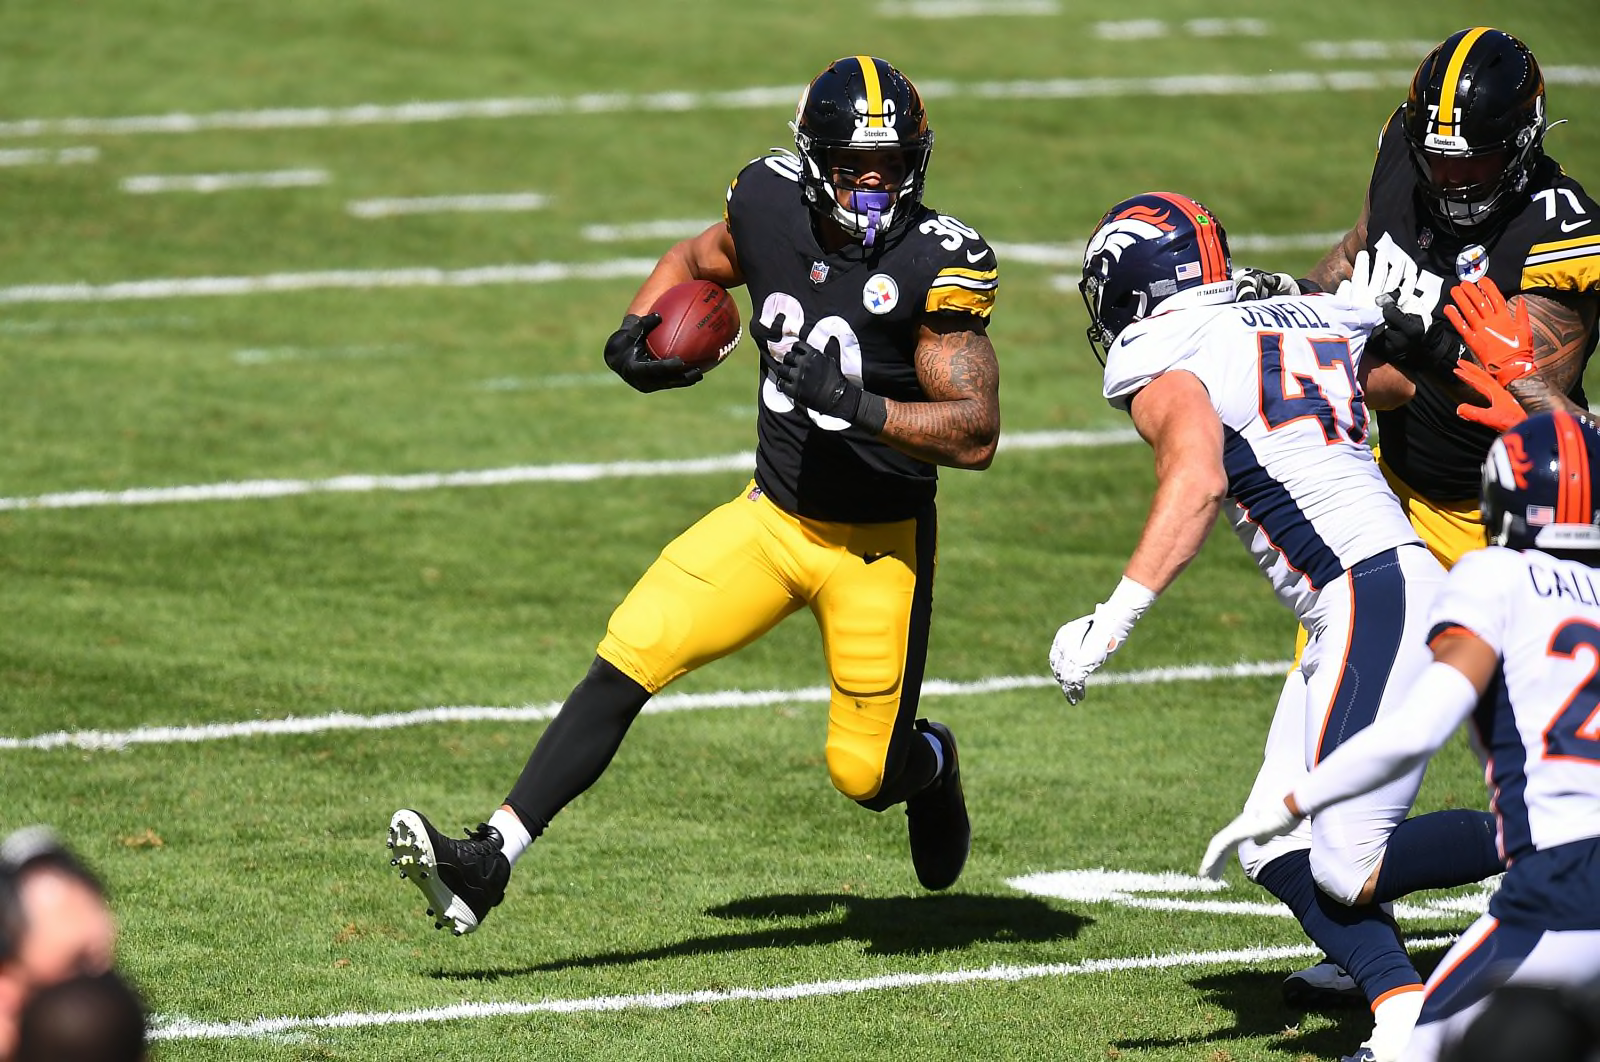 who is number 26 on the pittsburgh steelers